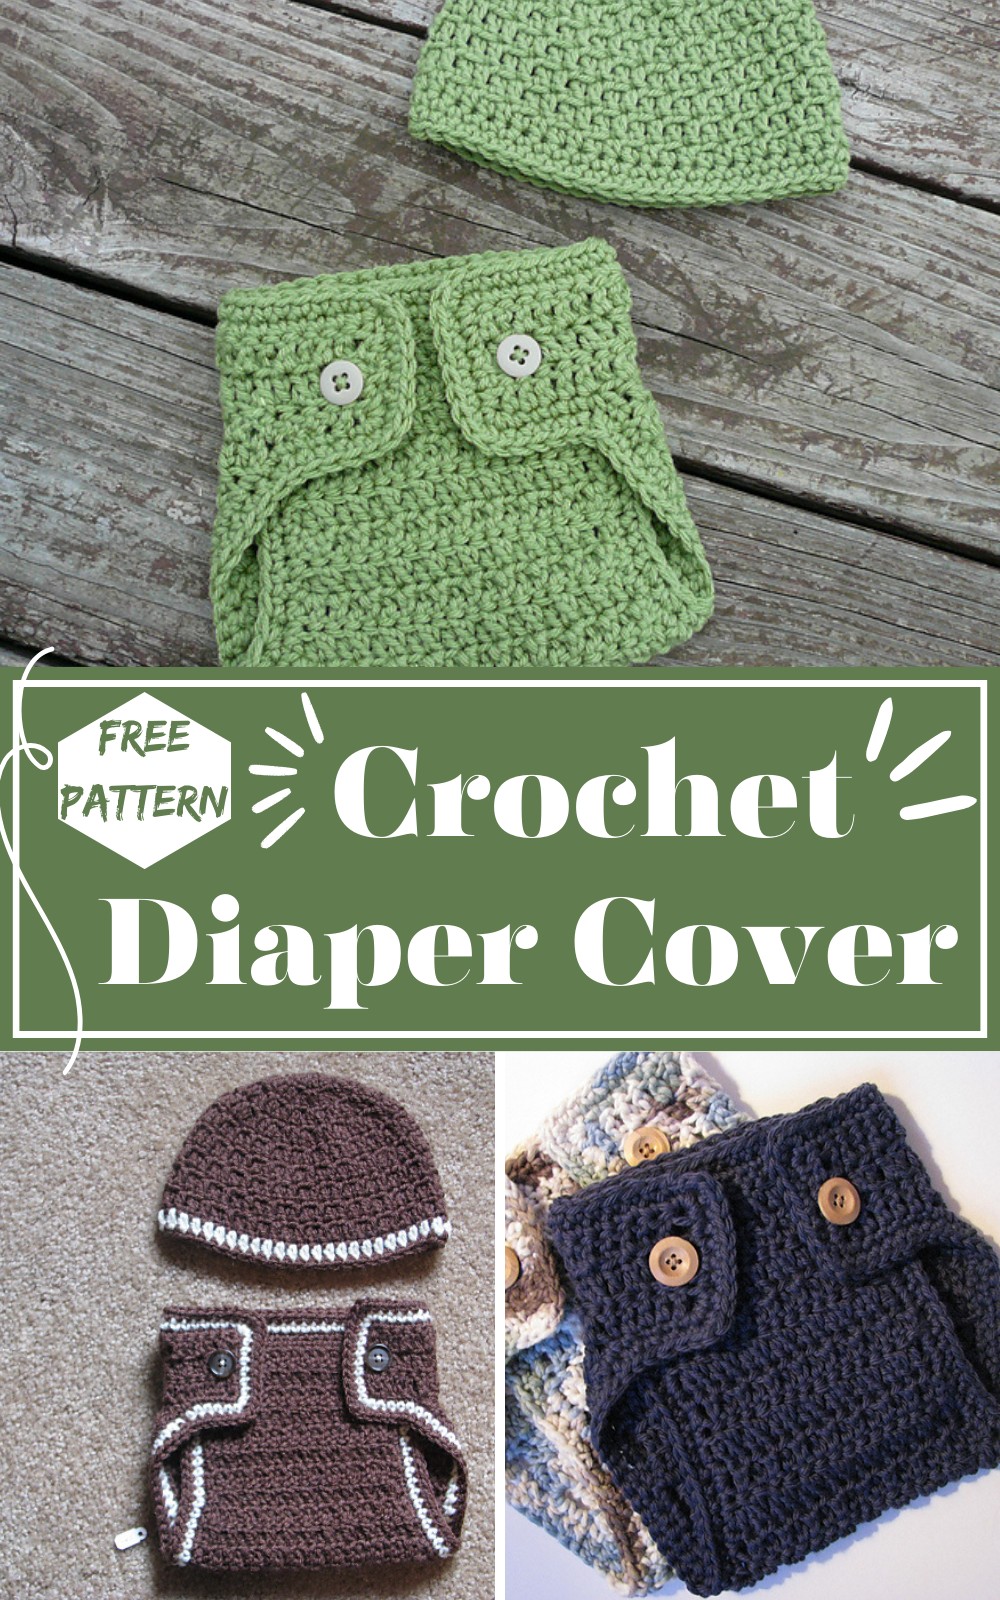 Diaper Cover and Beanie